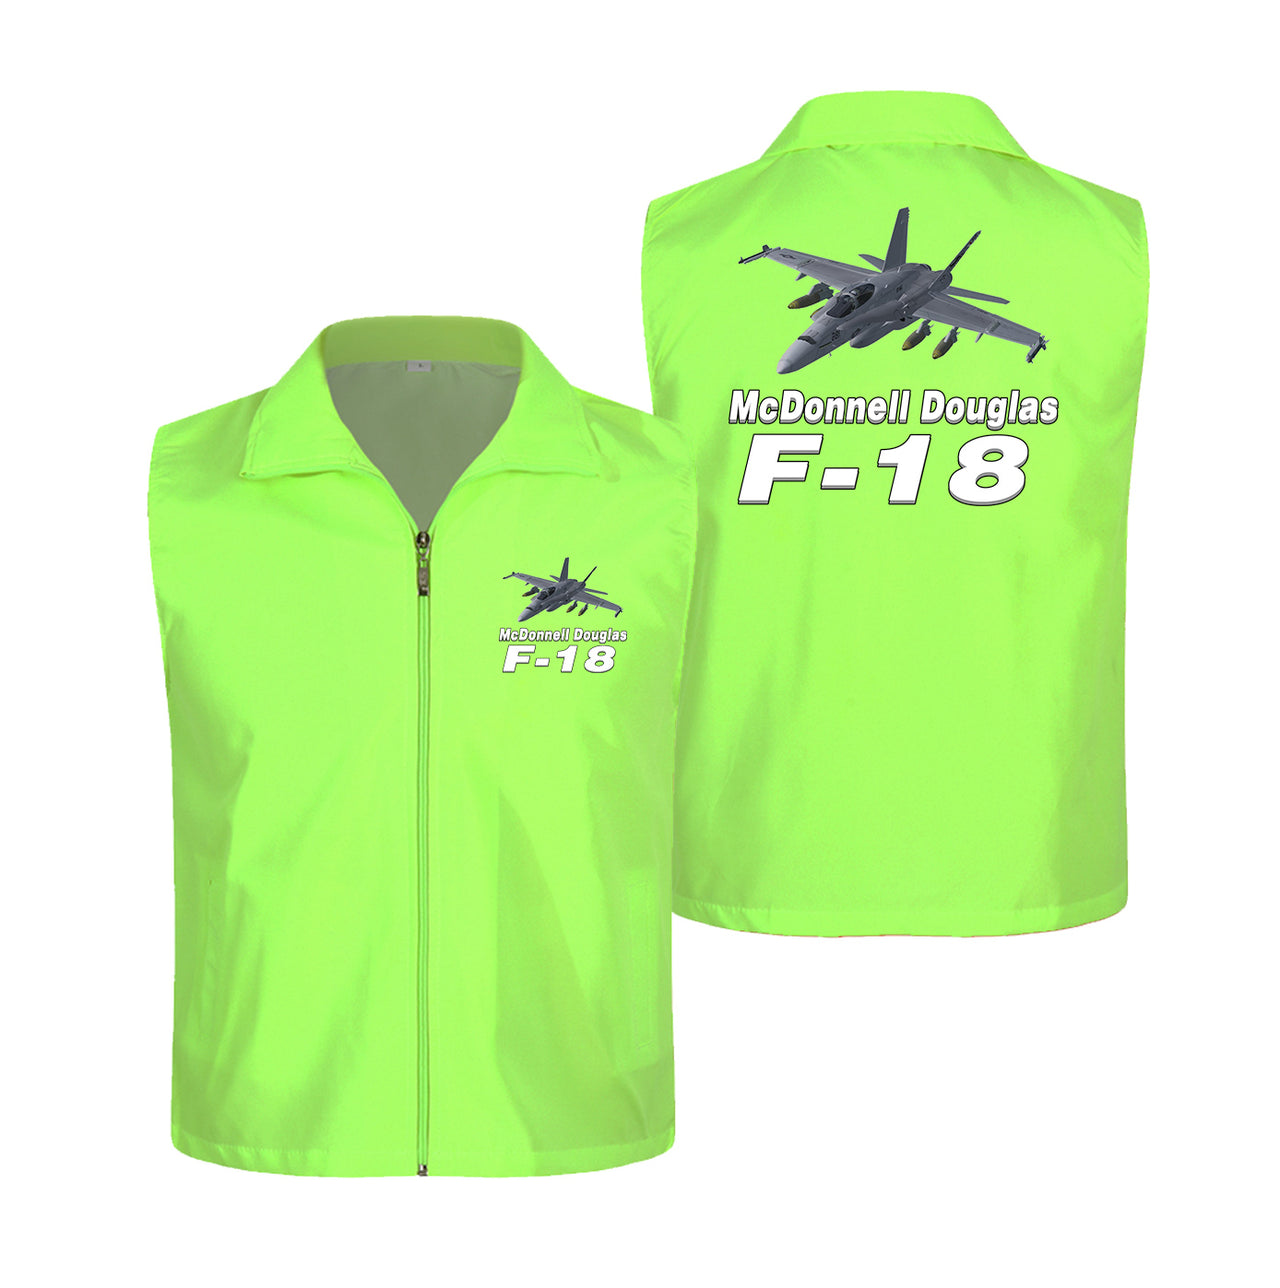 The McDonnell Douglas F18 Designed Thin Style Vests